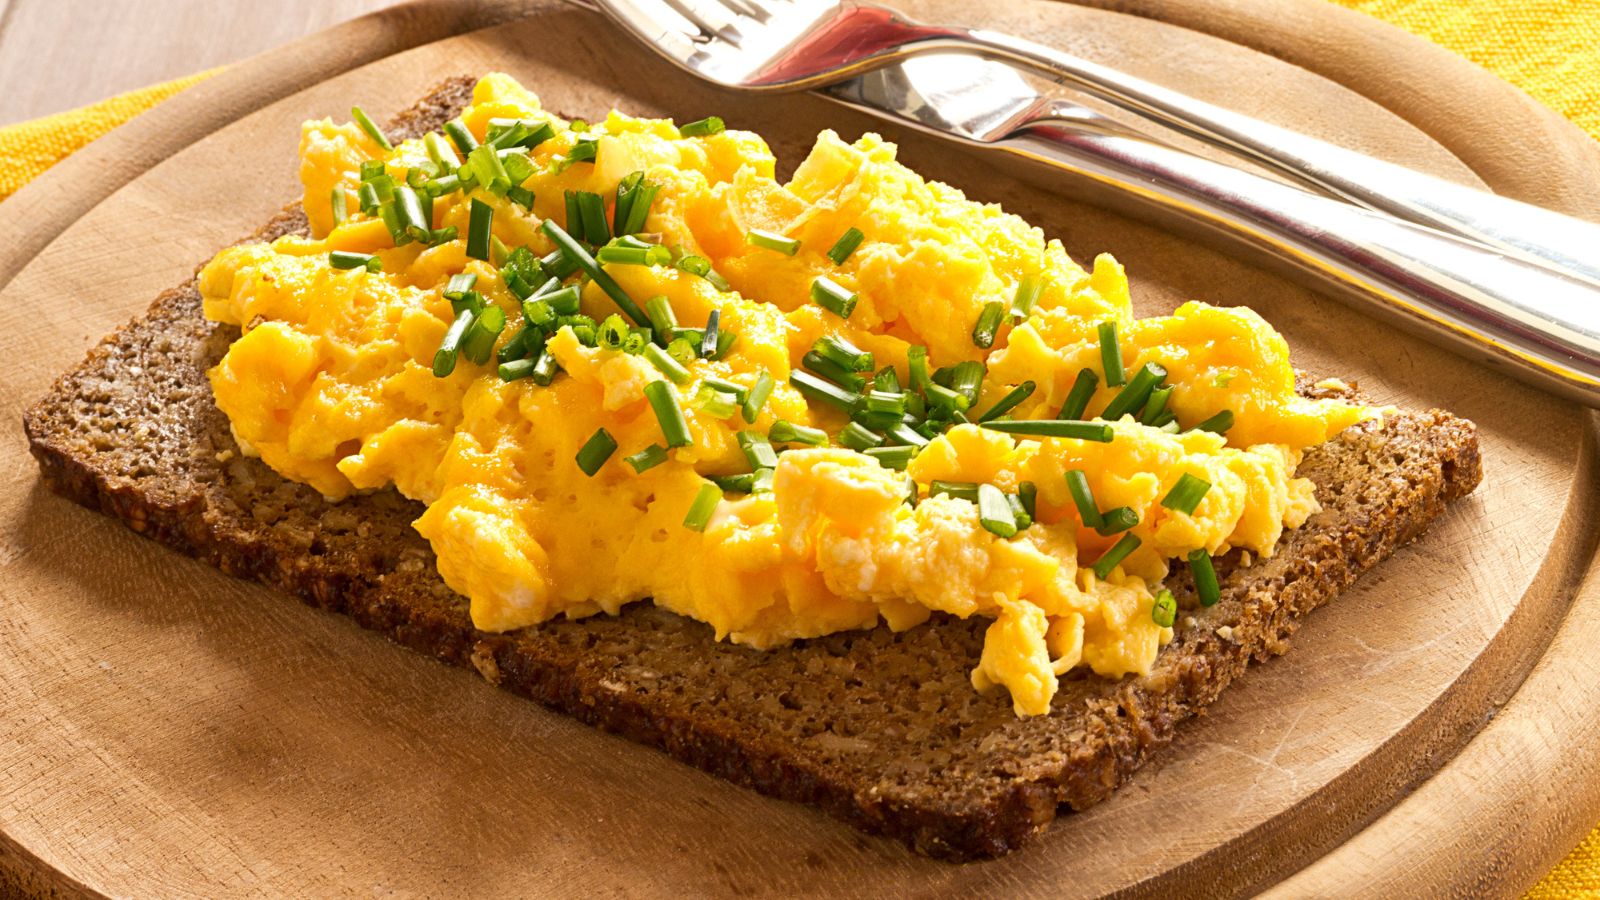 20 High-Protein Breakfast Ideas to Stop Food Cravings, Boost Energy